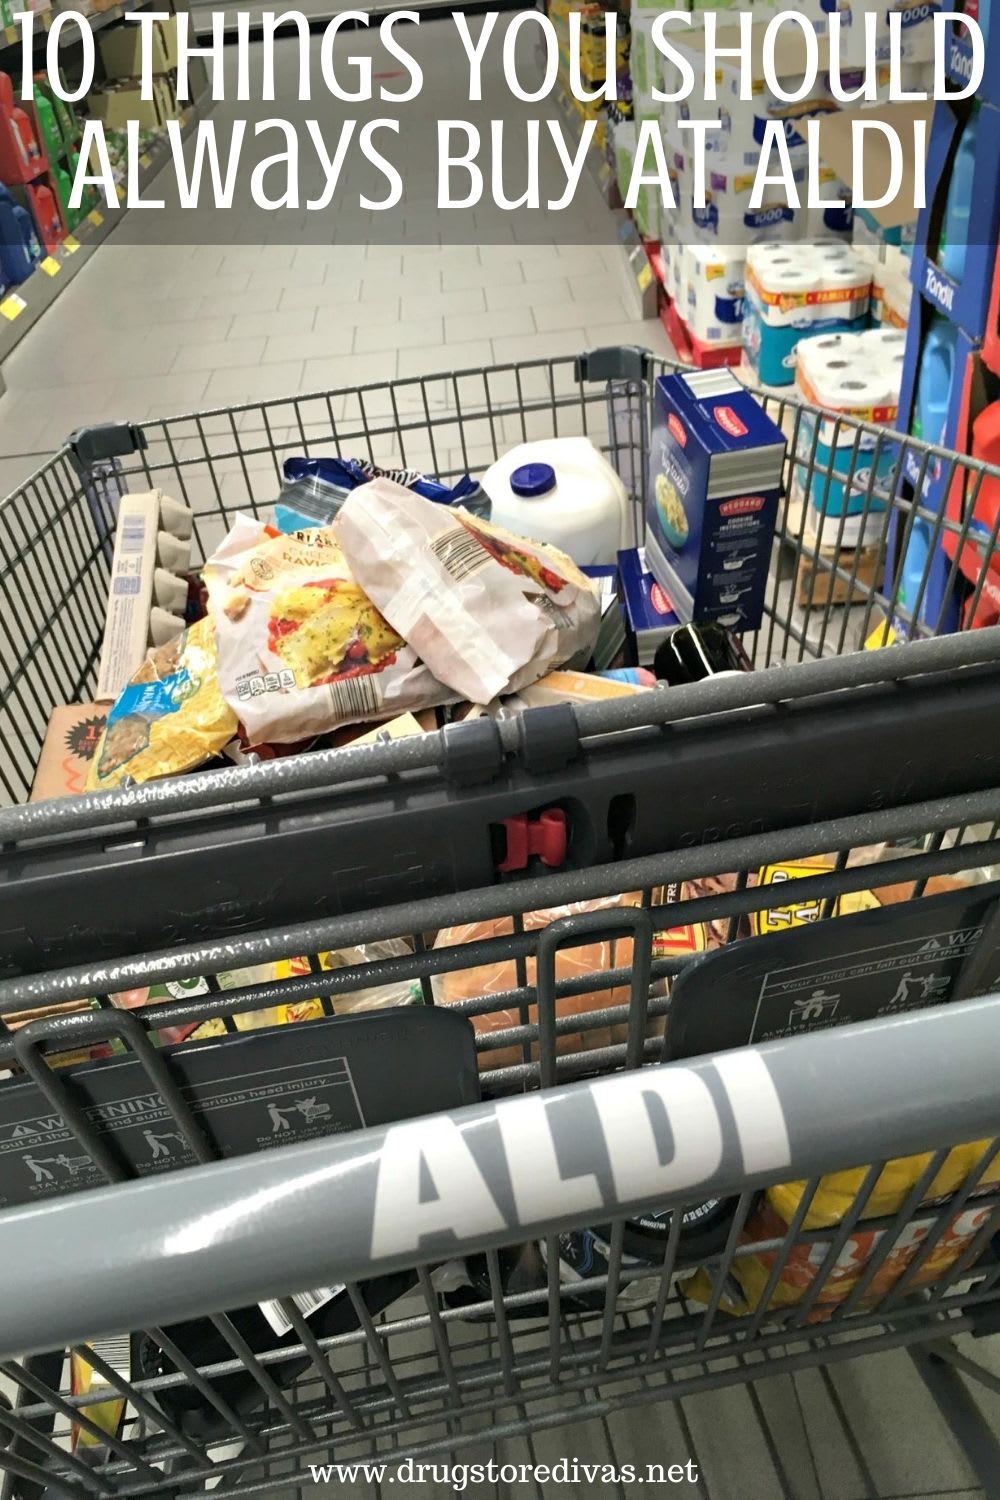 10 Things You Should Always Buy At ALDI